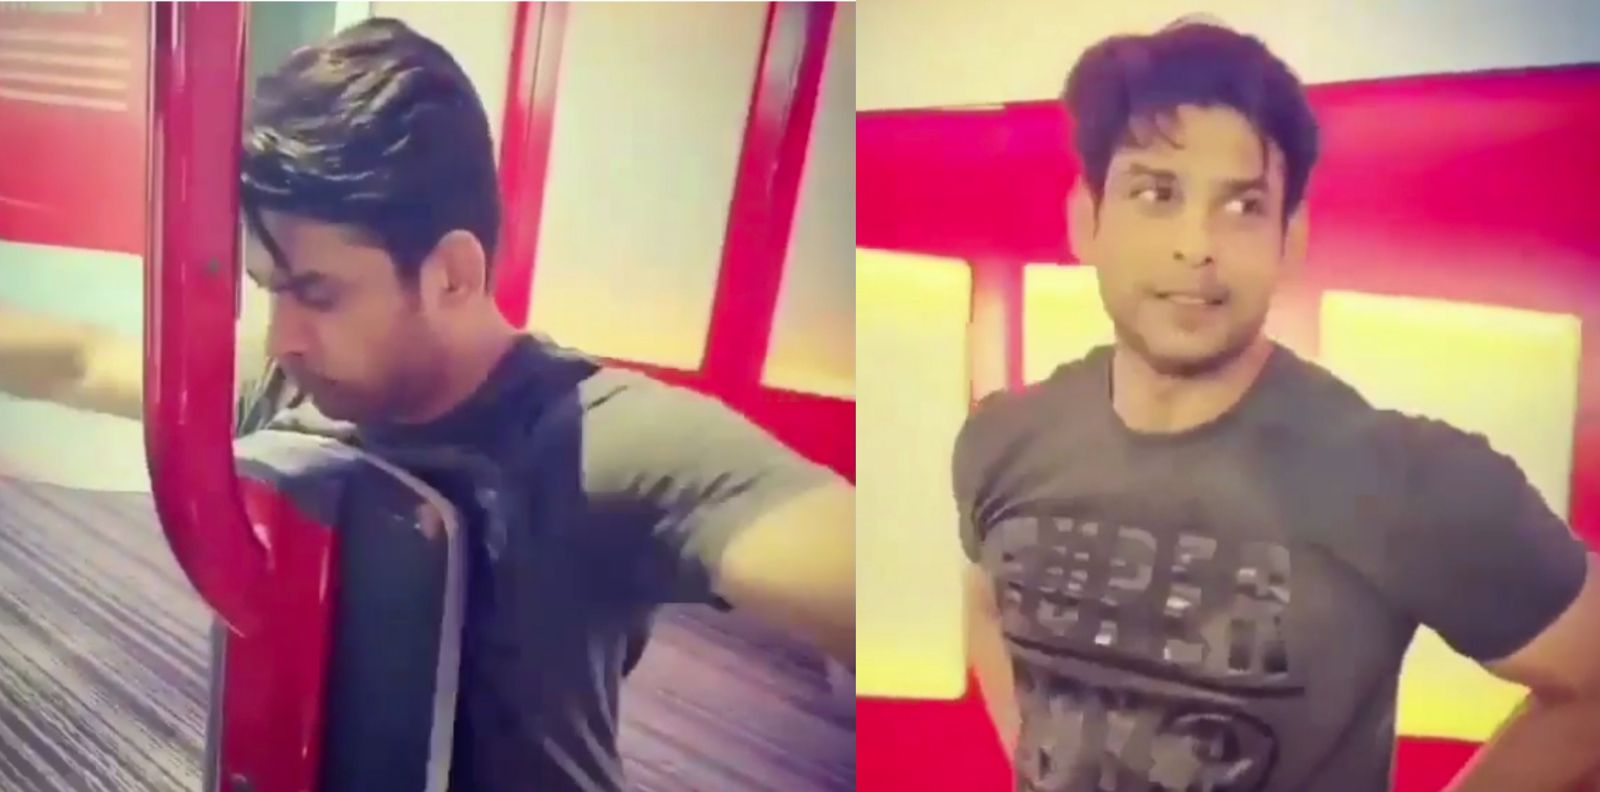 Sidharth Shukla Sweats It Out At The Gym And Is Giving Us #FridayFitness Goals! Watch Video...